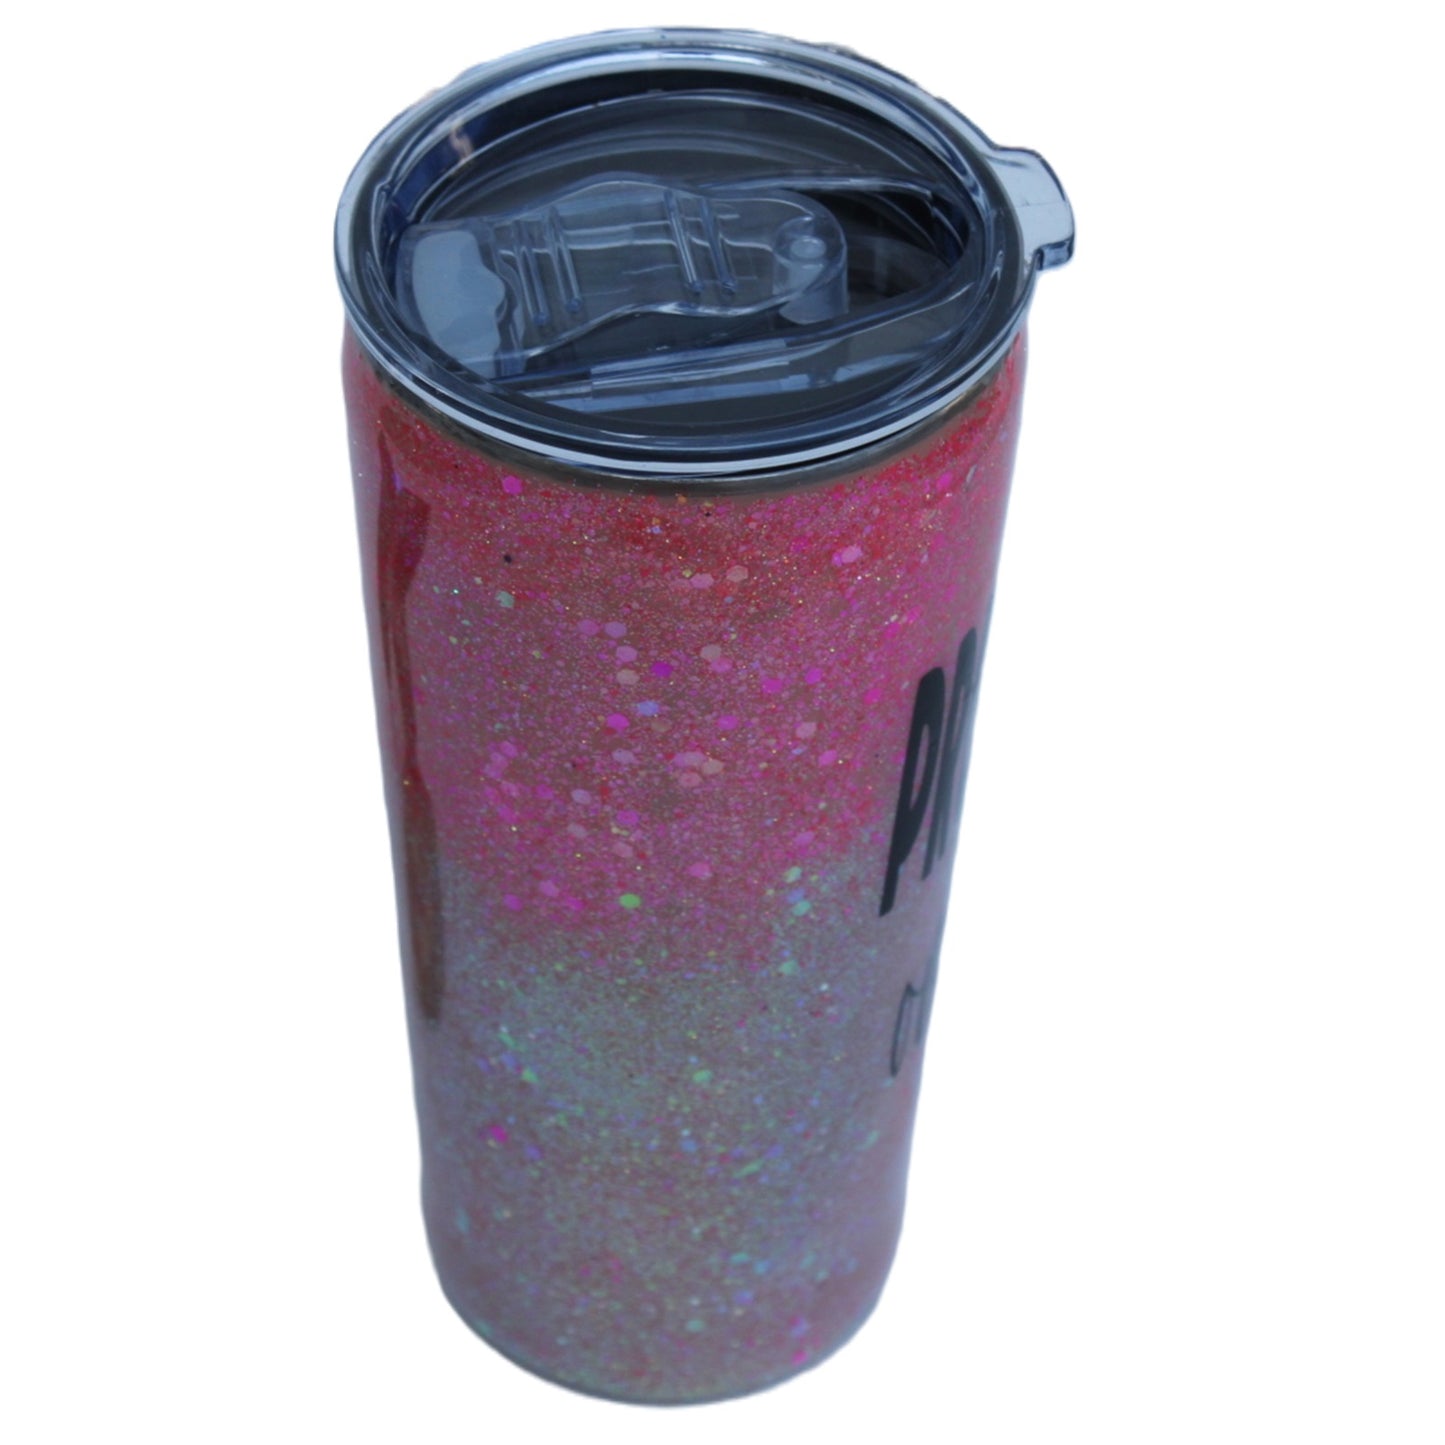 Tumbler Tapered Smooth 20 ounce with "Professional Over Thinker" written on the side